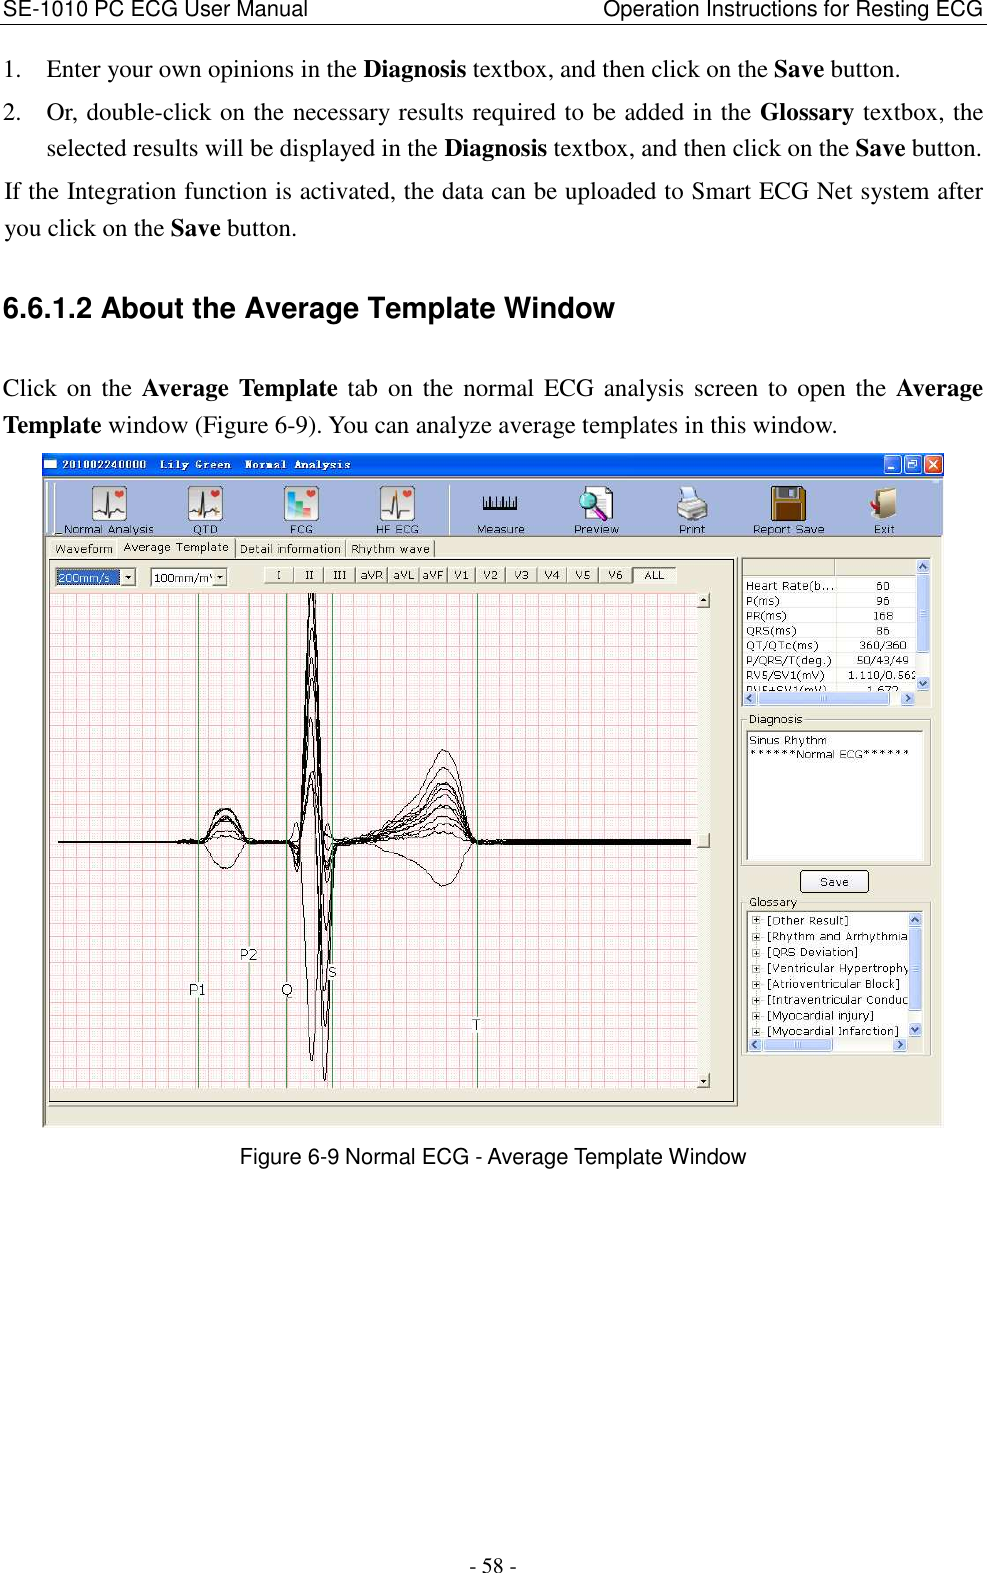 SE-1010 PC ECG User Manual                                                      Operation Instructions for Resting ECG - 58 - 1. Enter your own opinions in the Diagnosis textbox, and then click on the Save button. 2. Or, double-click on the necessary results required to be added in the Glossary textbox, the selected results will be displayed in the Diagnosis textbox, and then click on the Save button. If the Integration function is activated, the data can be uploaded to Smart ECG Net system after you click on the Save button. 6.6.1.2 About the Average Template Window Click on the Average Template tab on the normal  ECG analysis screen  to  open the Average Template window (Figure 6-9). You can analyze average templates in this window.  Figure 6-9 Normal ECG - Average Template Window 